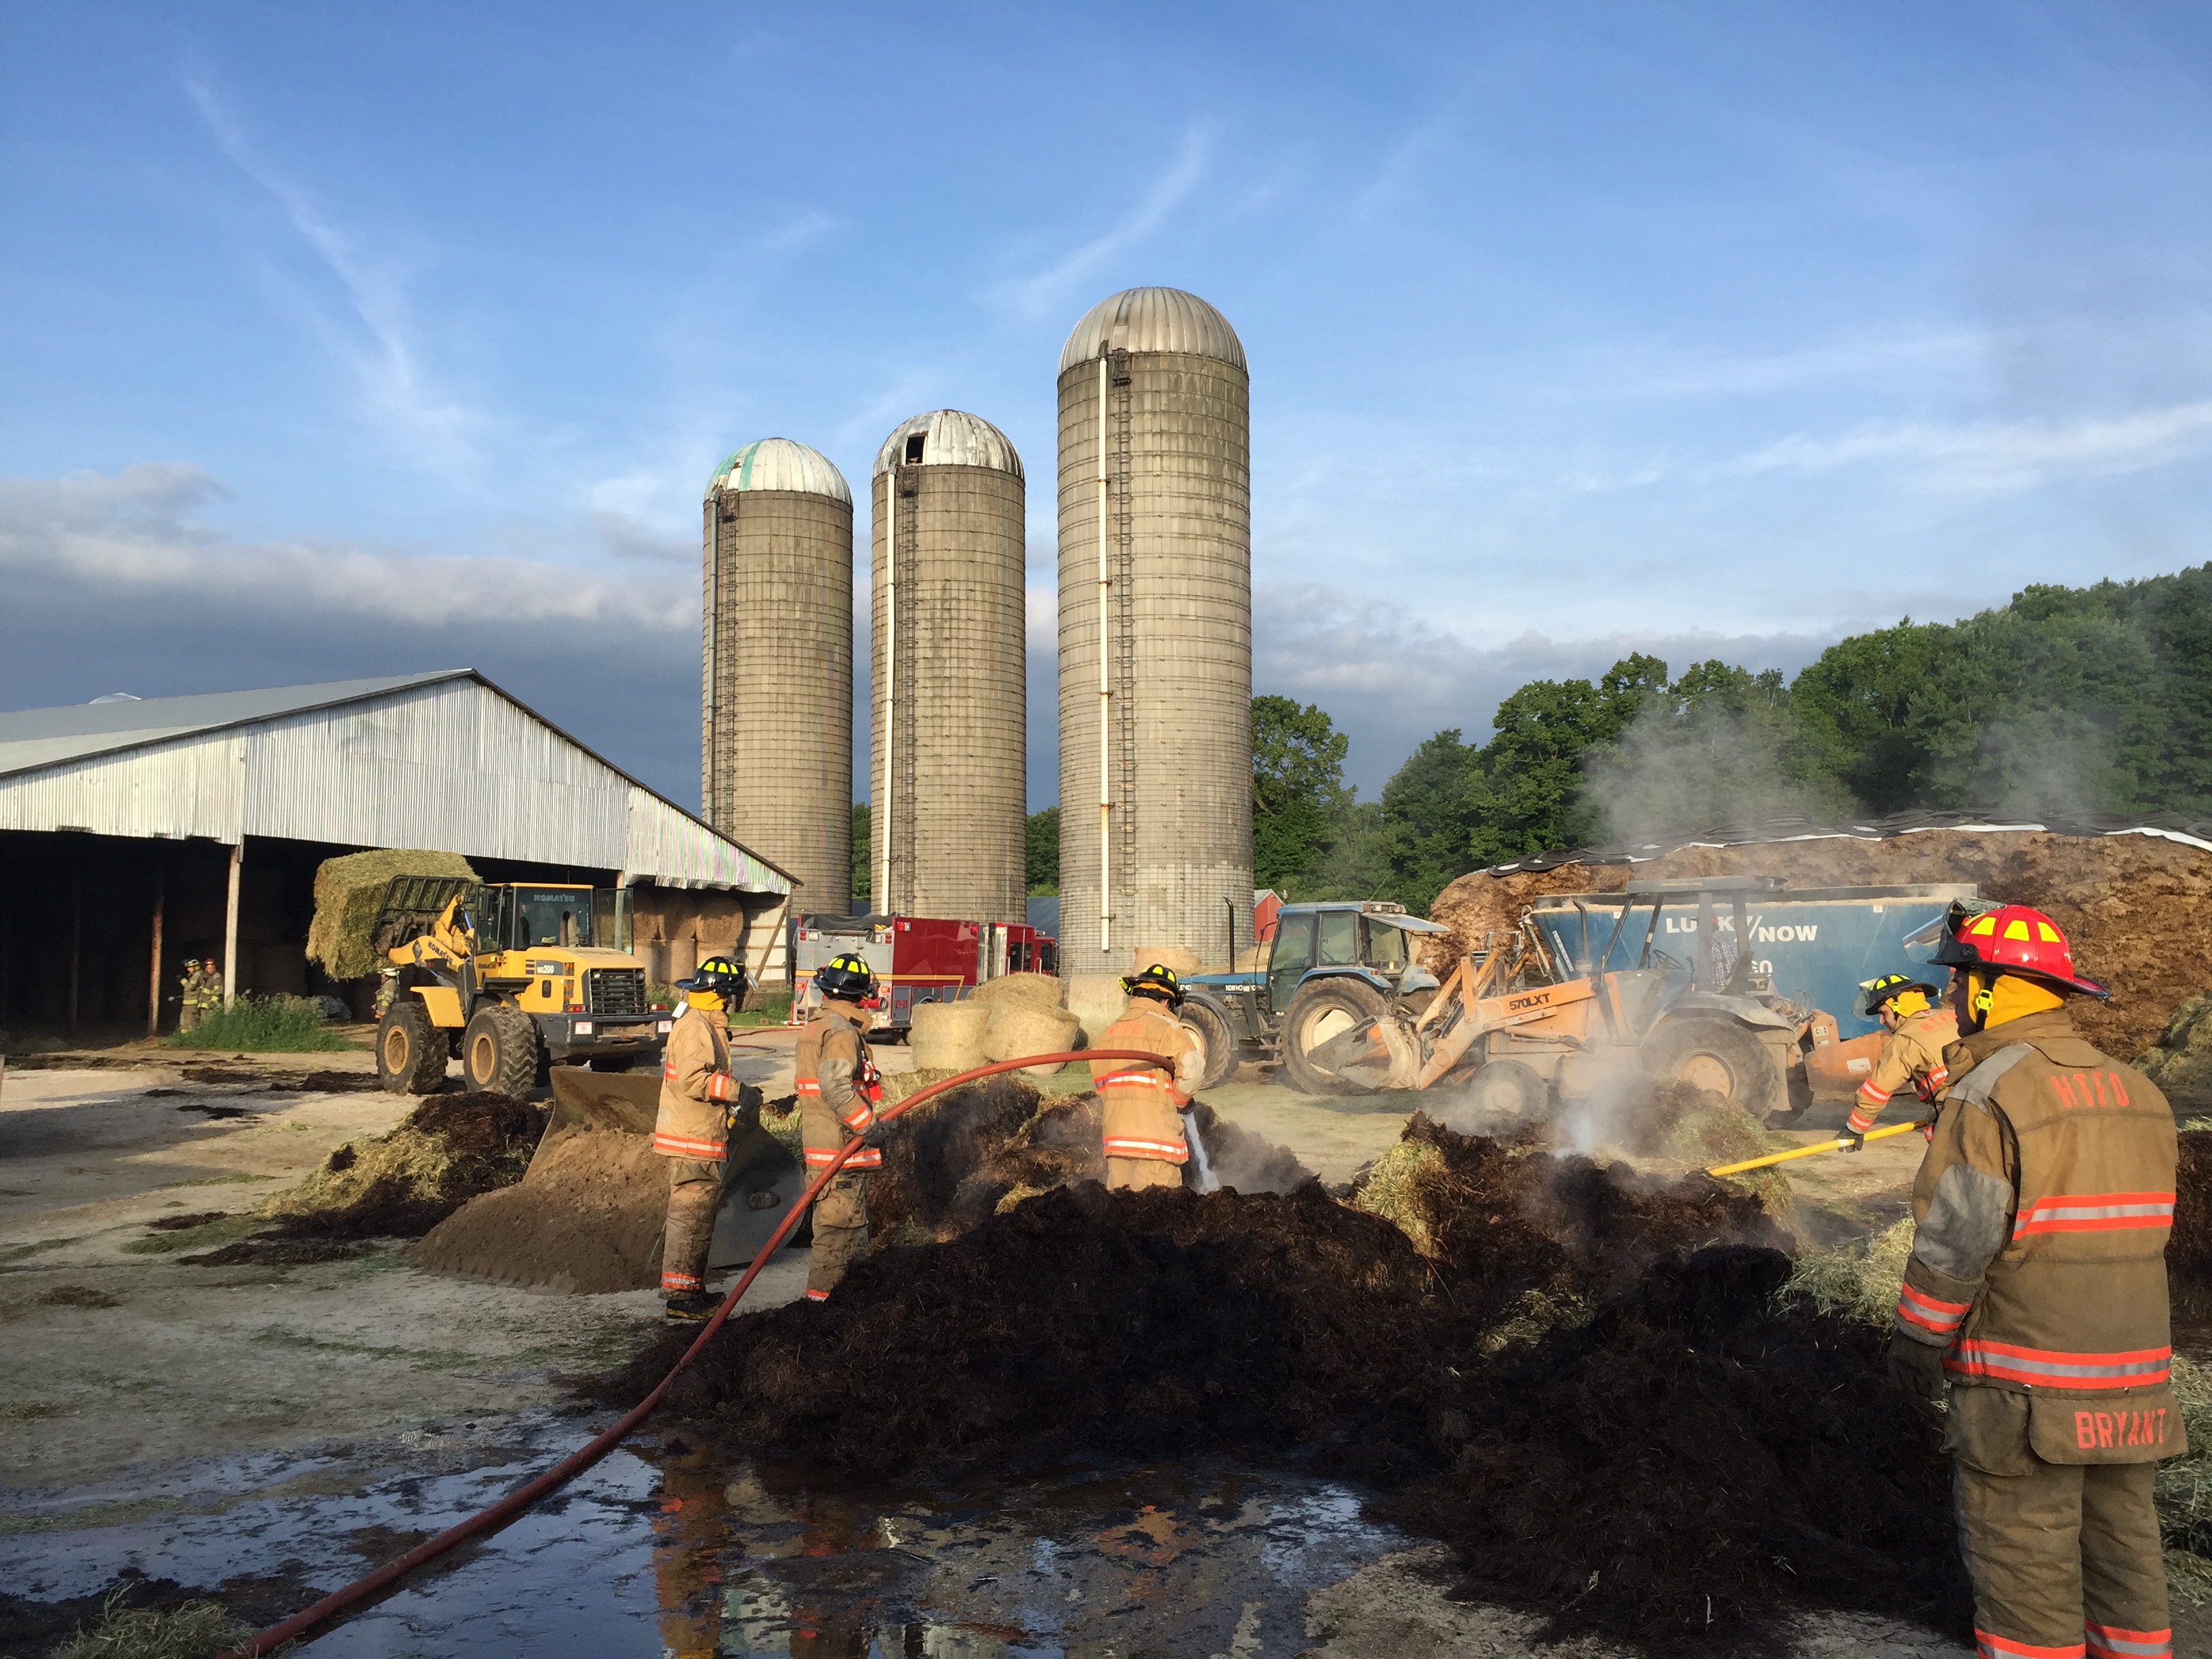 Quick action by farmer and fire department prevents barn fire.